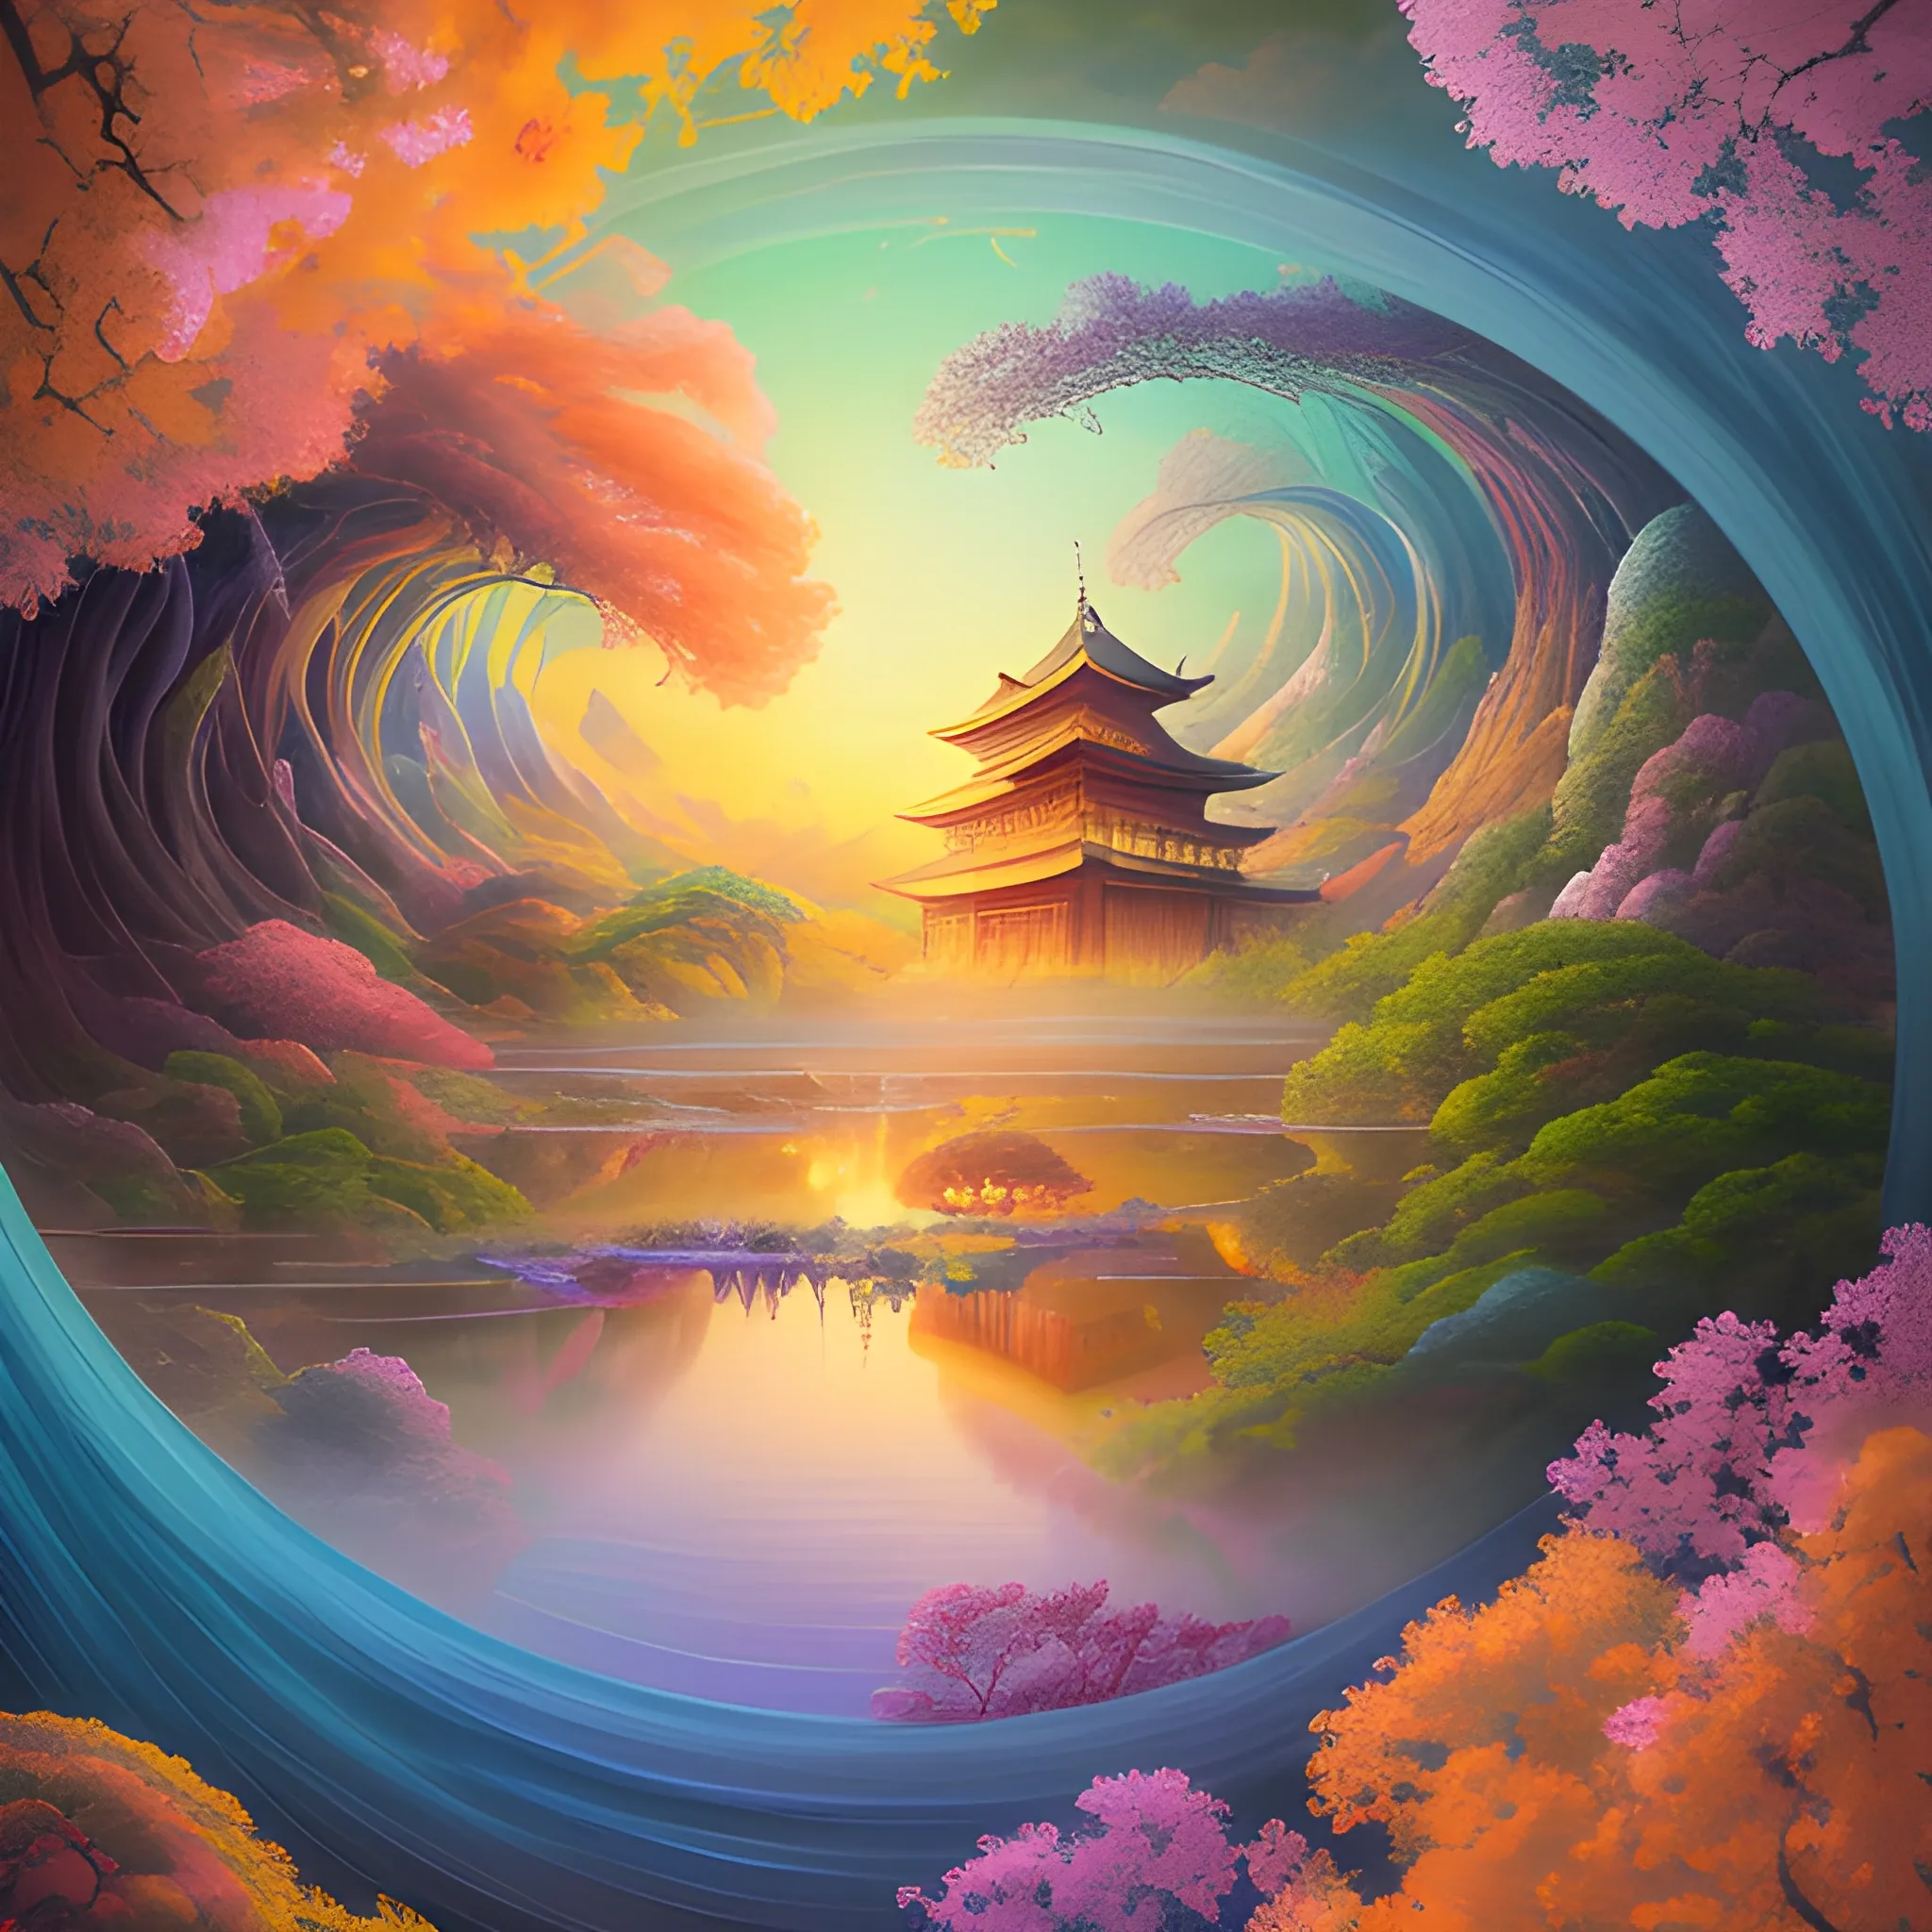 (by Ananta Mandal (and Andrew Biraj:0.5)), (in the style of nihonga), Style: Abstract, Medium: Digital illustration, Subject: A Bodhisattva of Compassion in the middle of picture, An otherworldly landscape with floating islands, cascading waterfalls, and vibrant flora and fauna. Camera Angle: Overhead shot capturing the vastness and intricate details of the scene. The colors are saturated, and the lighting creates a warm and ethereal atmosphere. The painting is highly detailed, with every brushstroke capturing the complexity of the imaginary world., (high quality), (detailed), (masterpiece), (best quality), (highres), (extremely detailed), (8k), seed:792315689